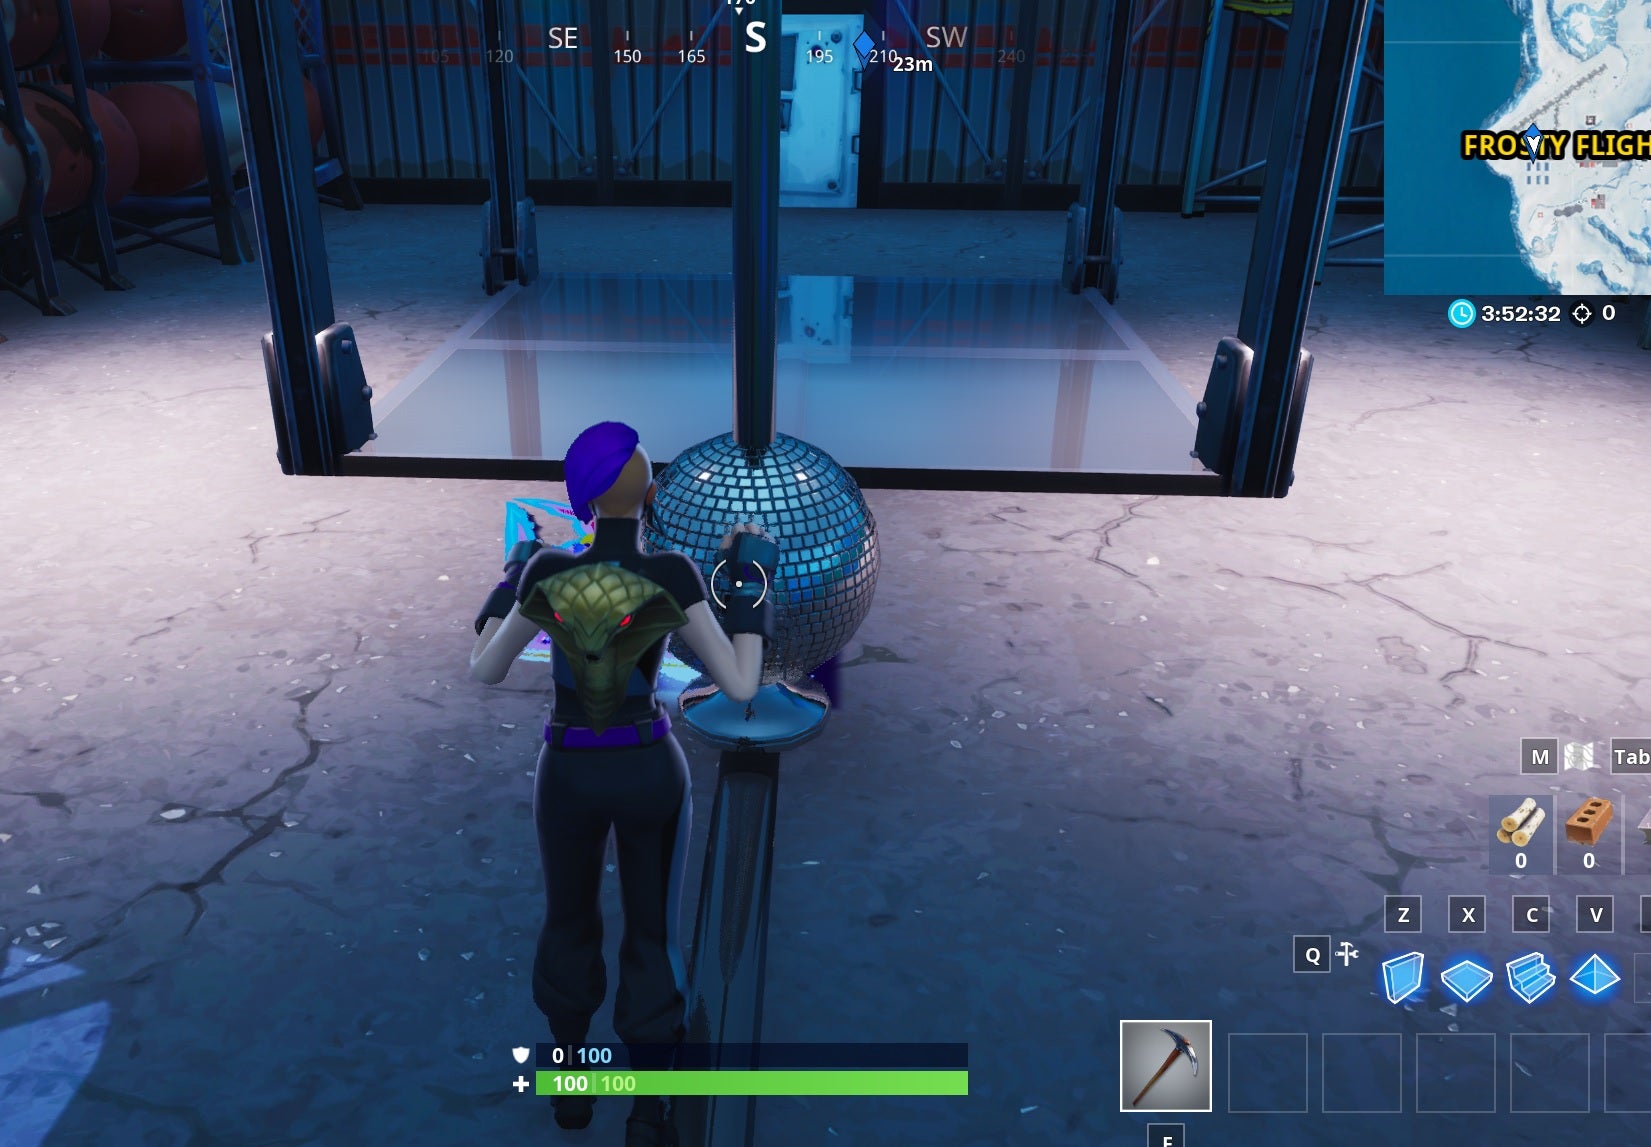 Image for Fortnite: dance with others to raise the disco ball in an icy airplane hangar